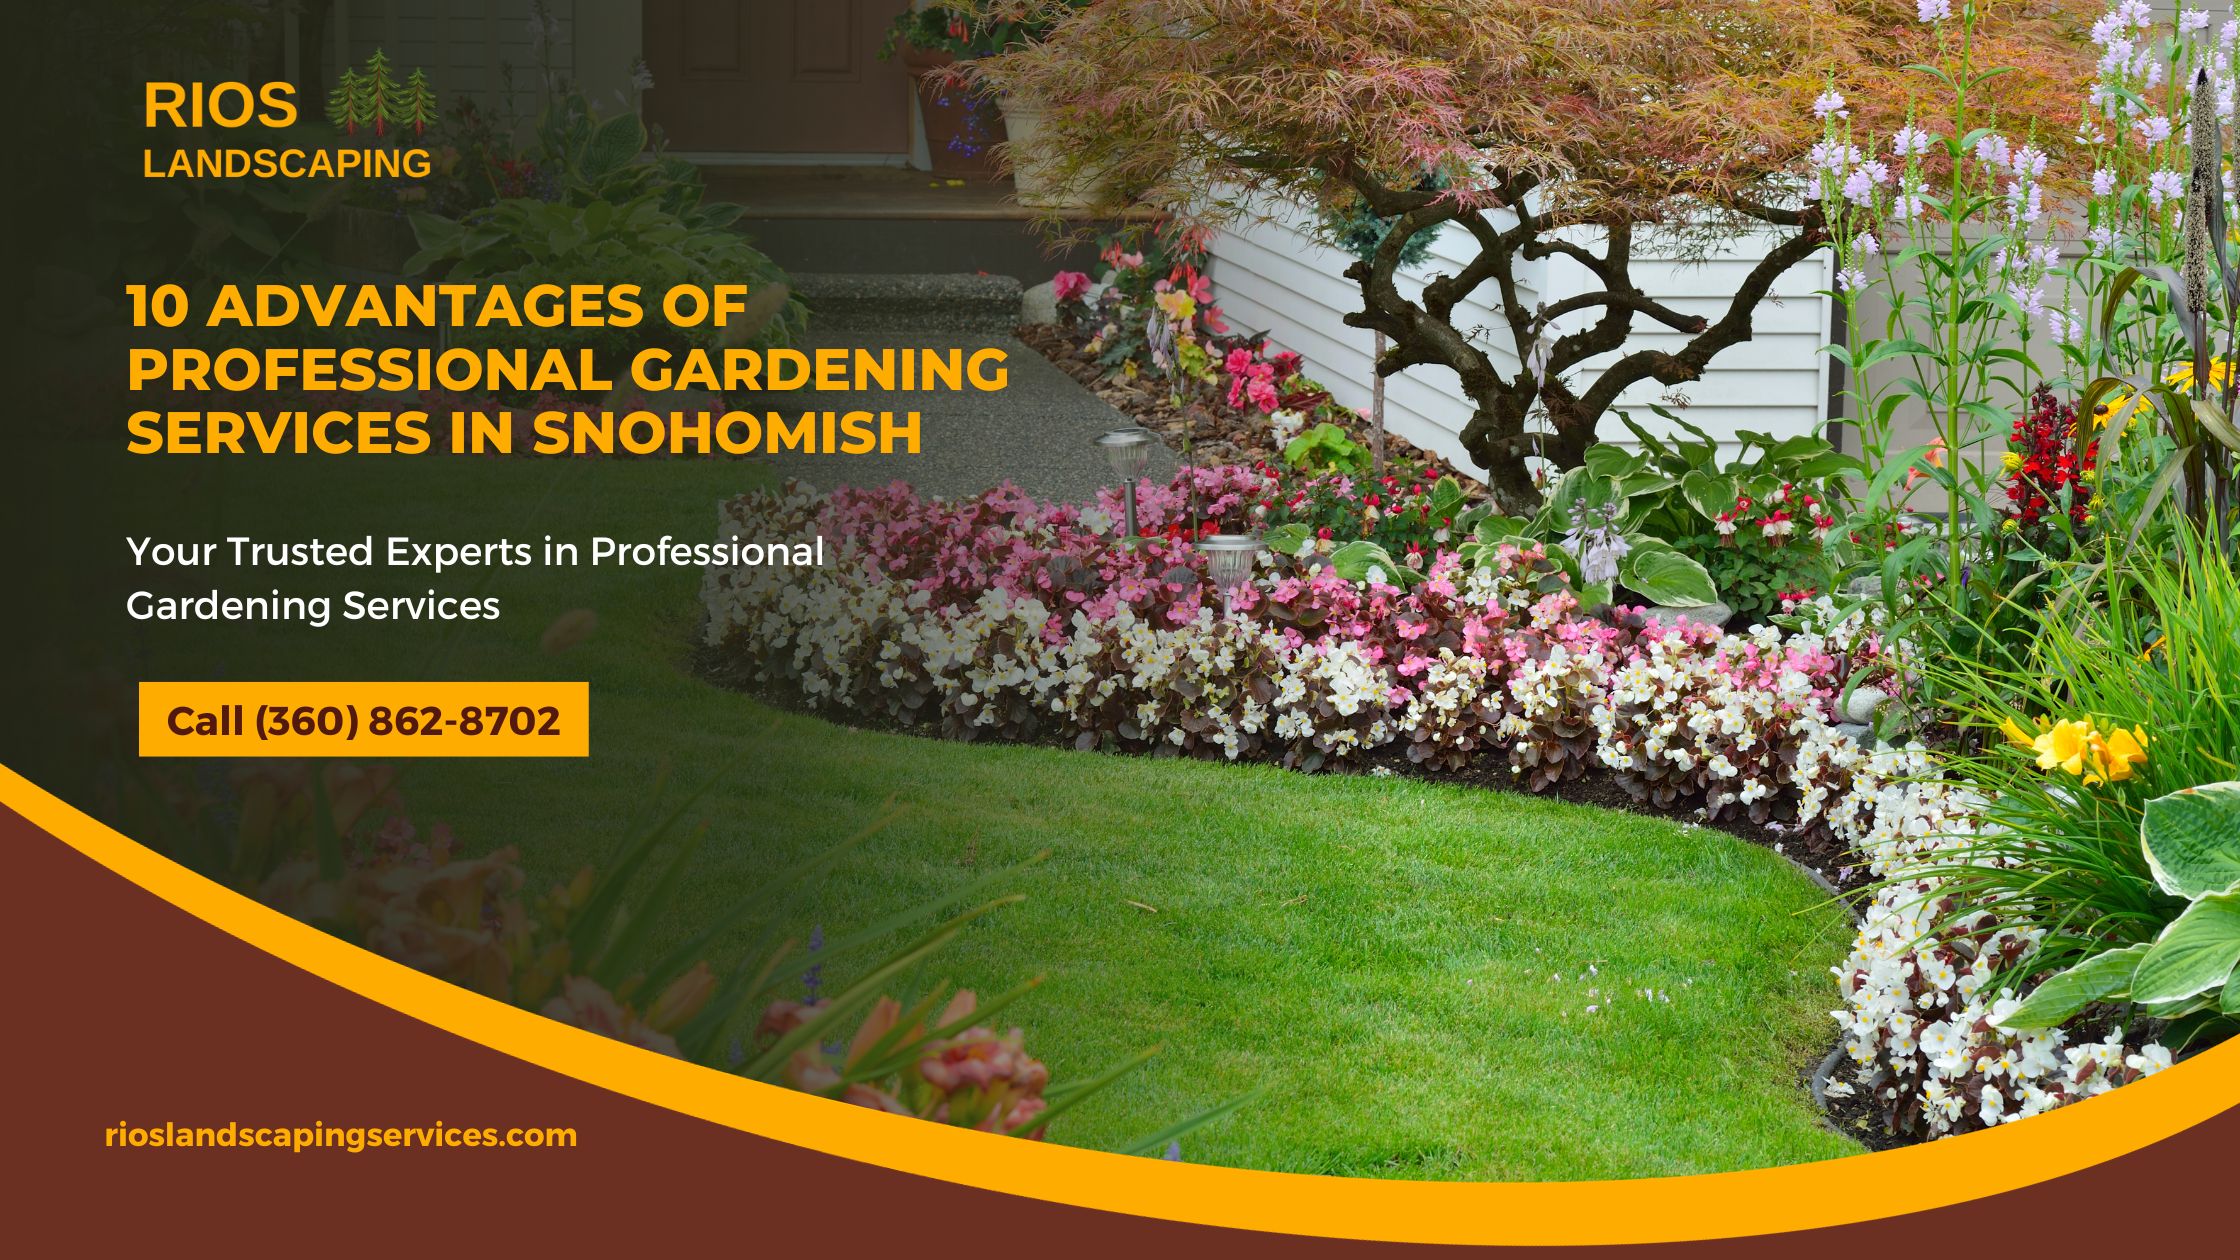 10 Advantages of Professional Gardening Services in Snohomish